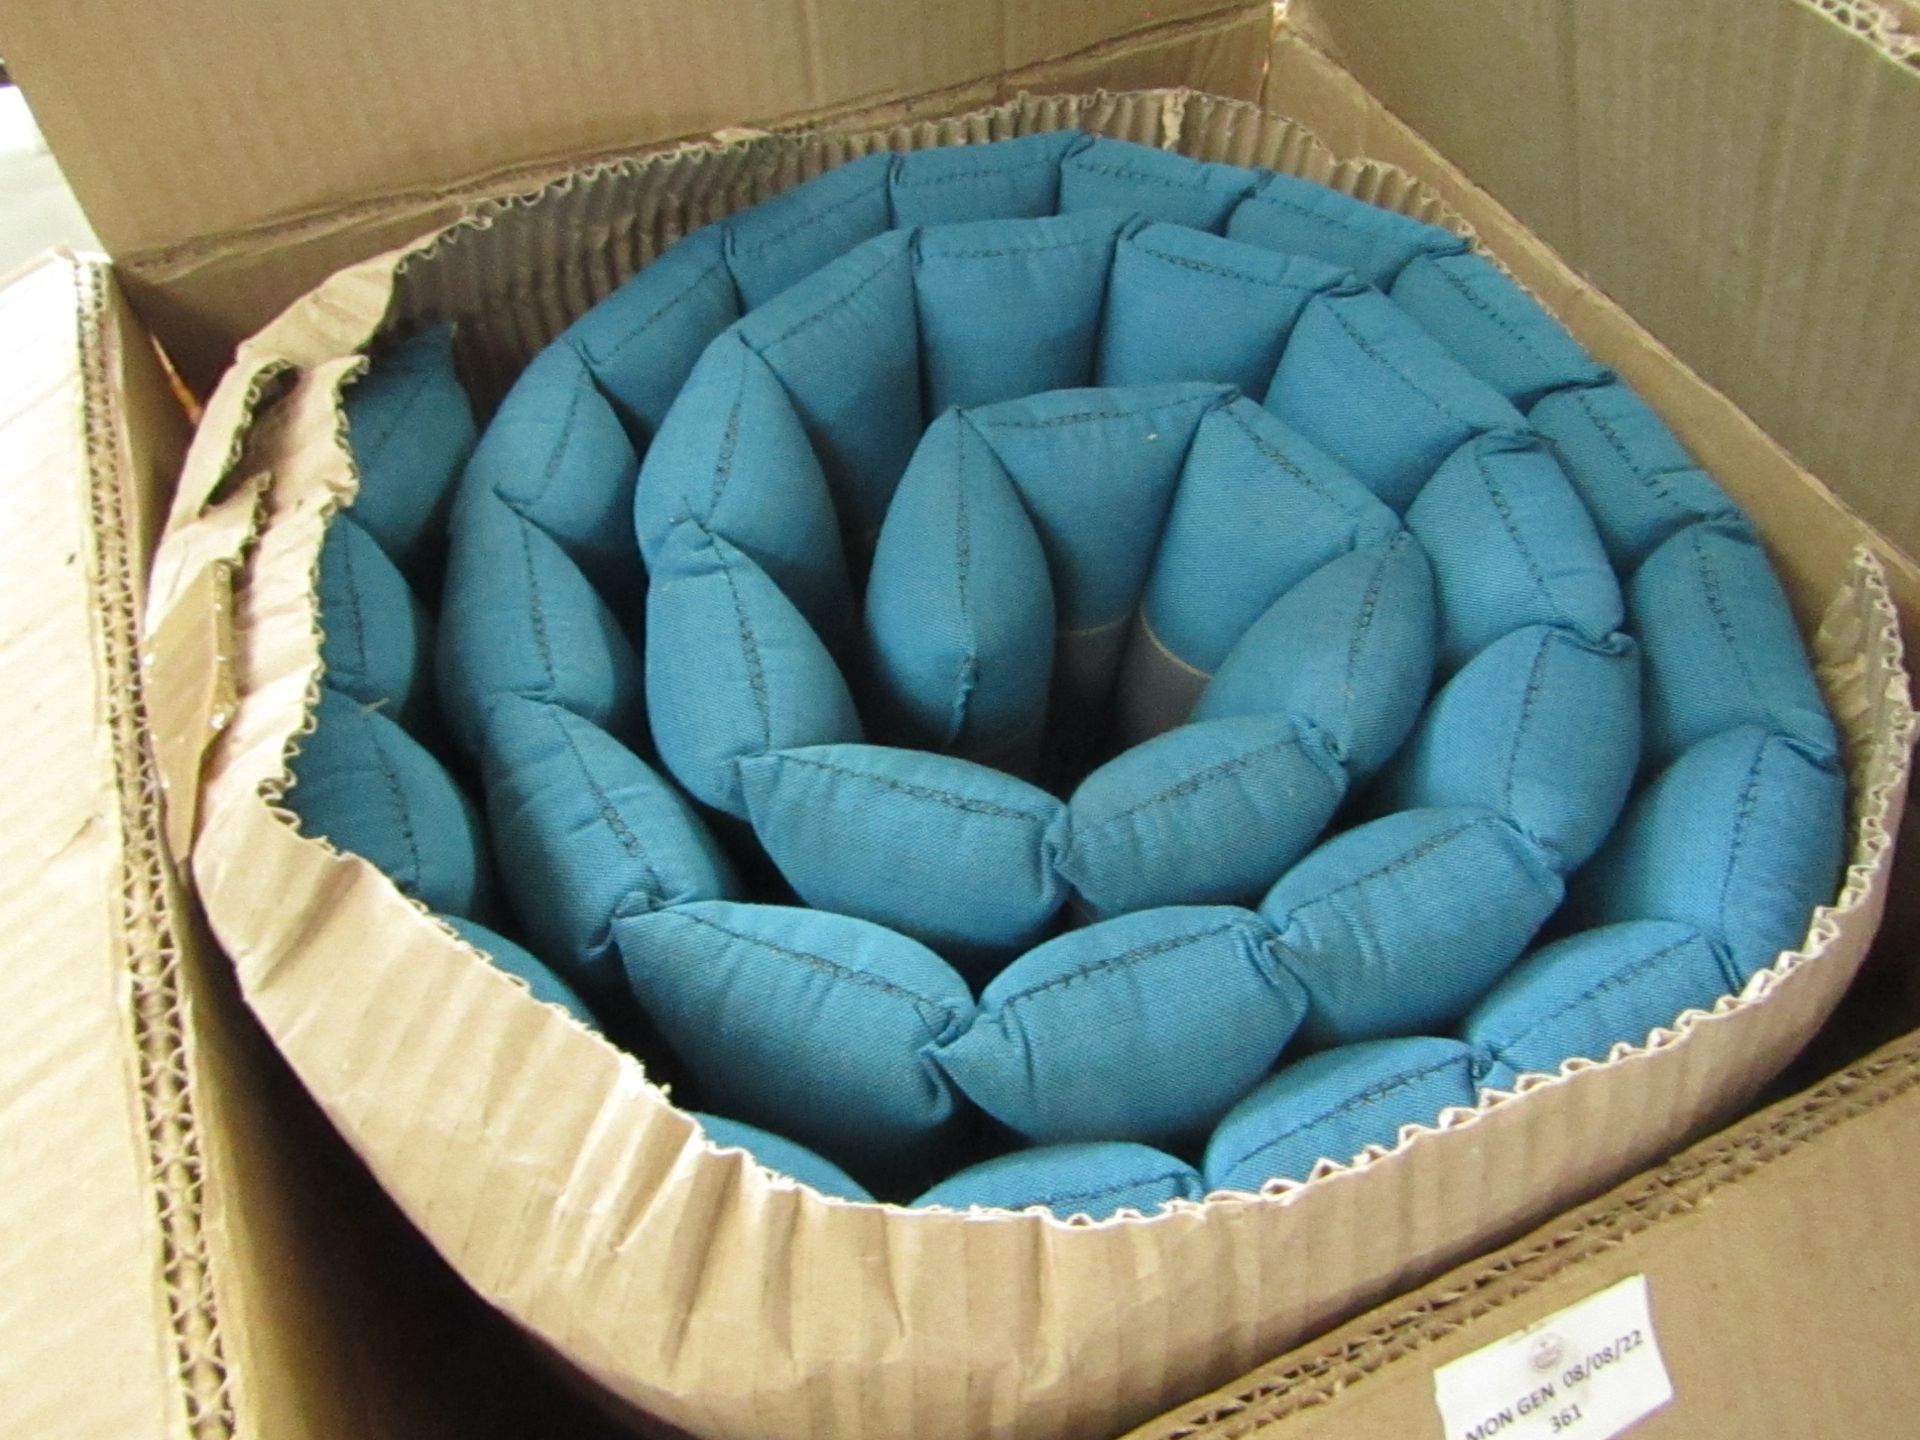 Laeto - Tripillow Blue - Suitable For Yoga Or As Daybed - Non Original Packaging.